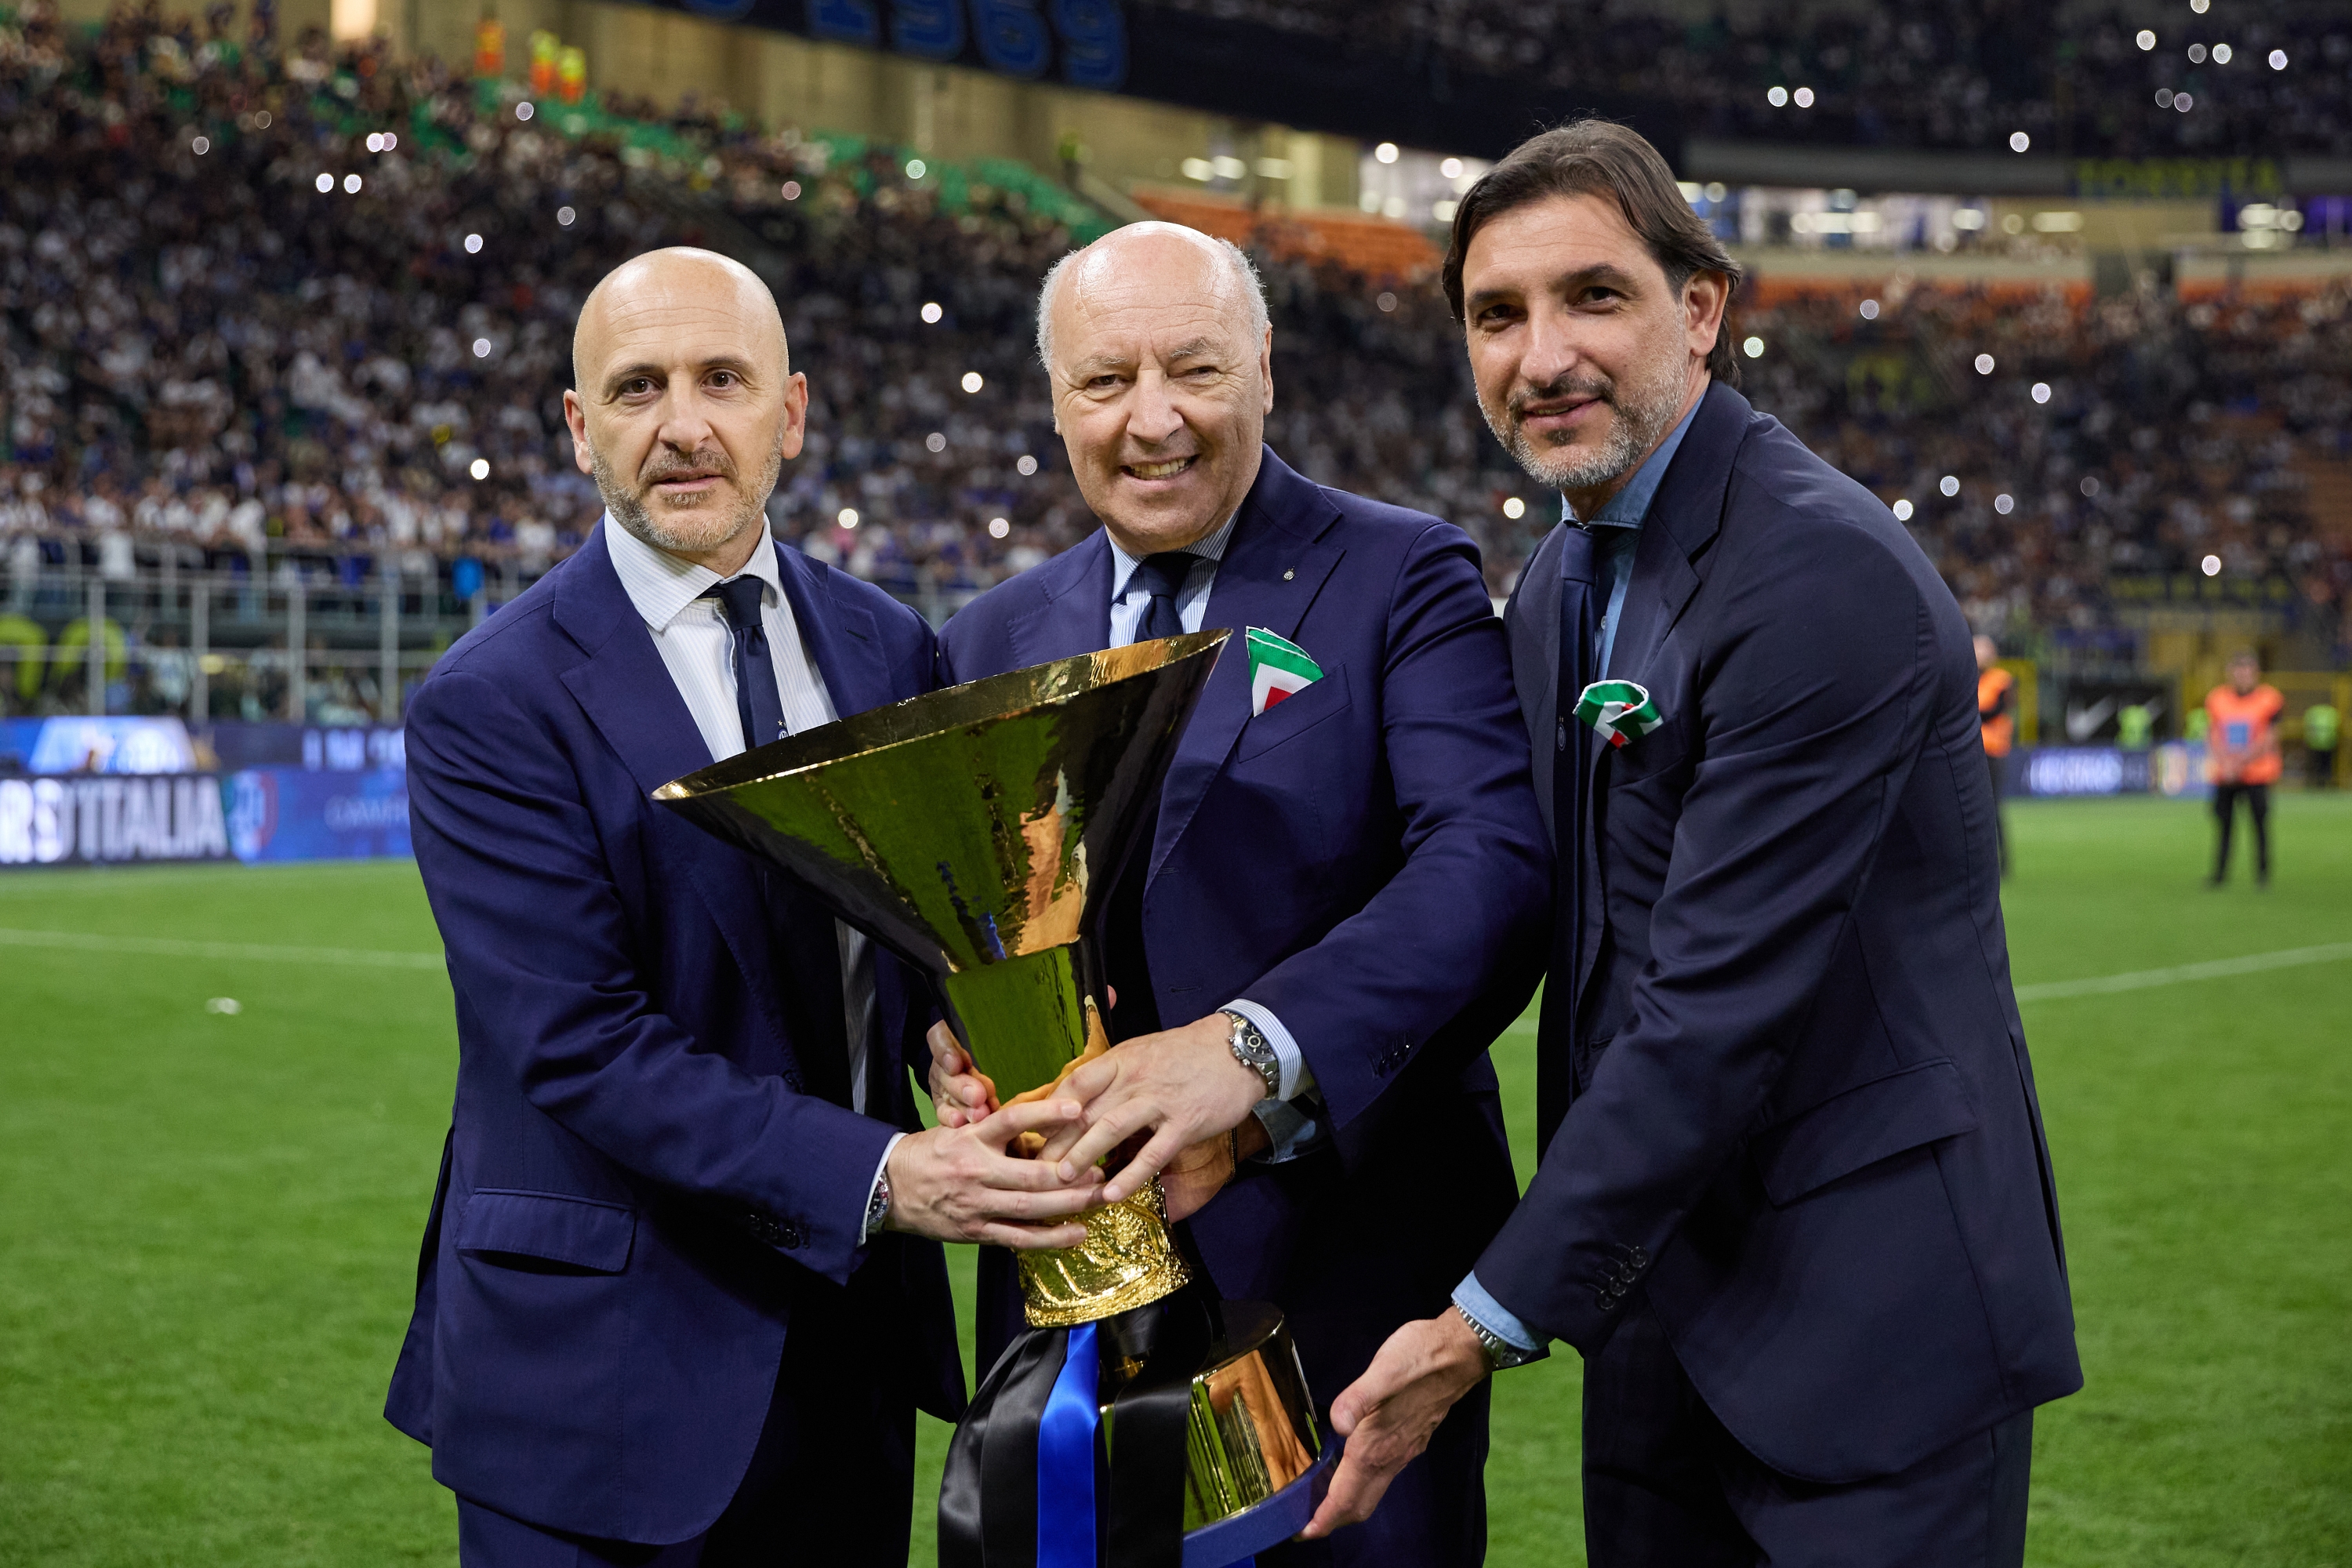 MILAN, ITALY - MAY 19: Piero Ausilio, Giuseppe Marotta and Dario Baccin during the Serie A TIM match between FC Internazionale and SS Lazio at Stadio Giuseppe Meazza on May 19, 2024 in Milan, Italy. (Photo by Francesco Scaccianoce - Inter/Inter via Getty Images)